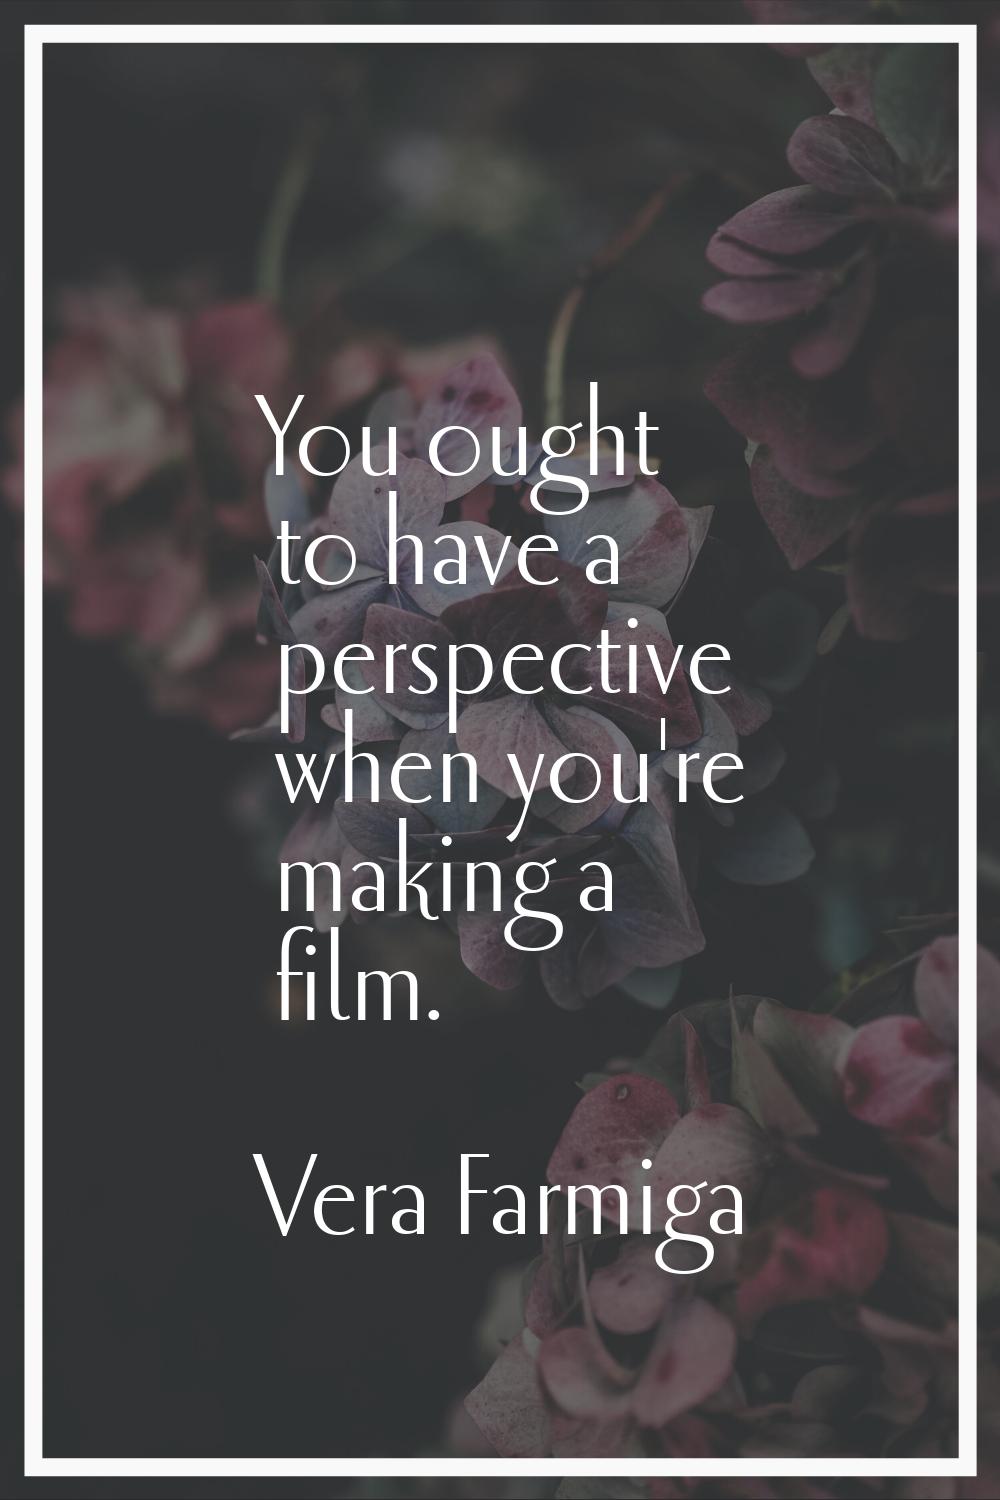 You ought to have a perspective when you're making a film.